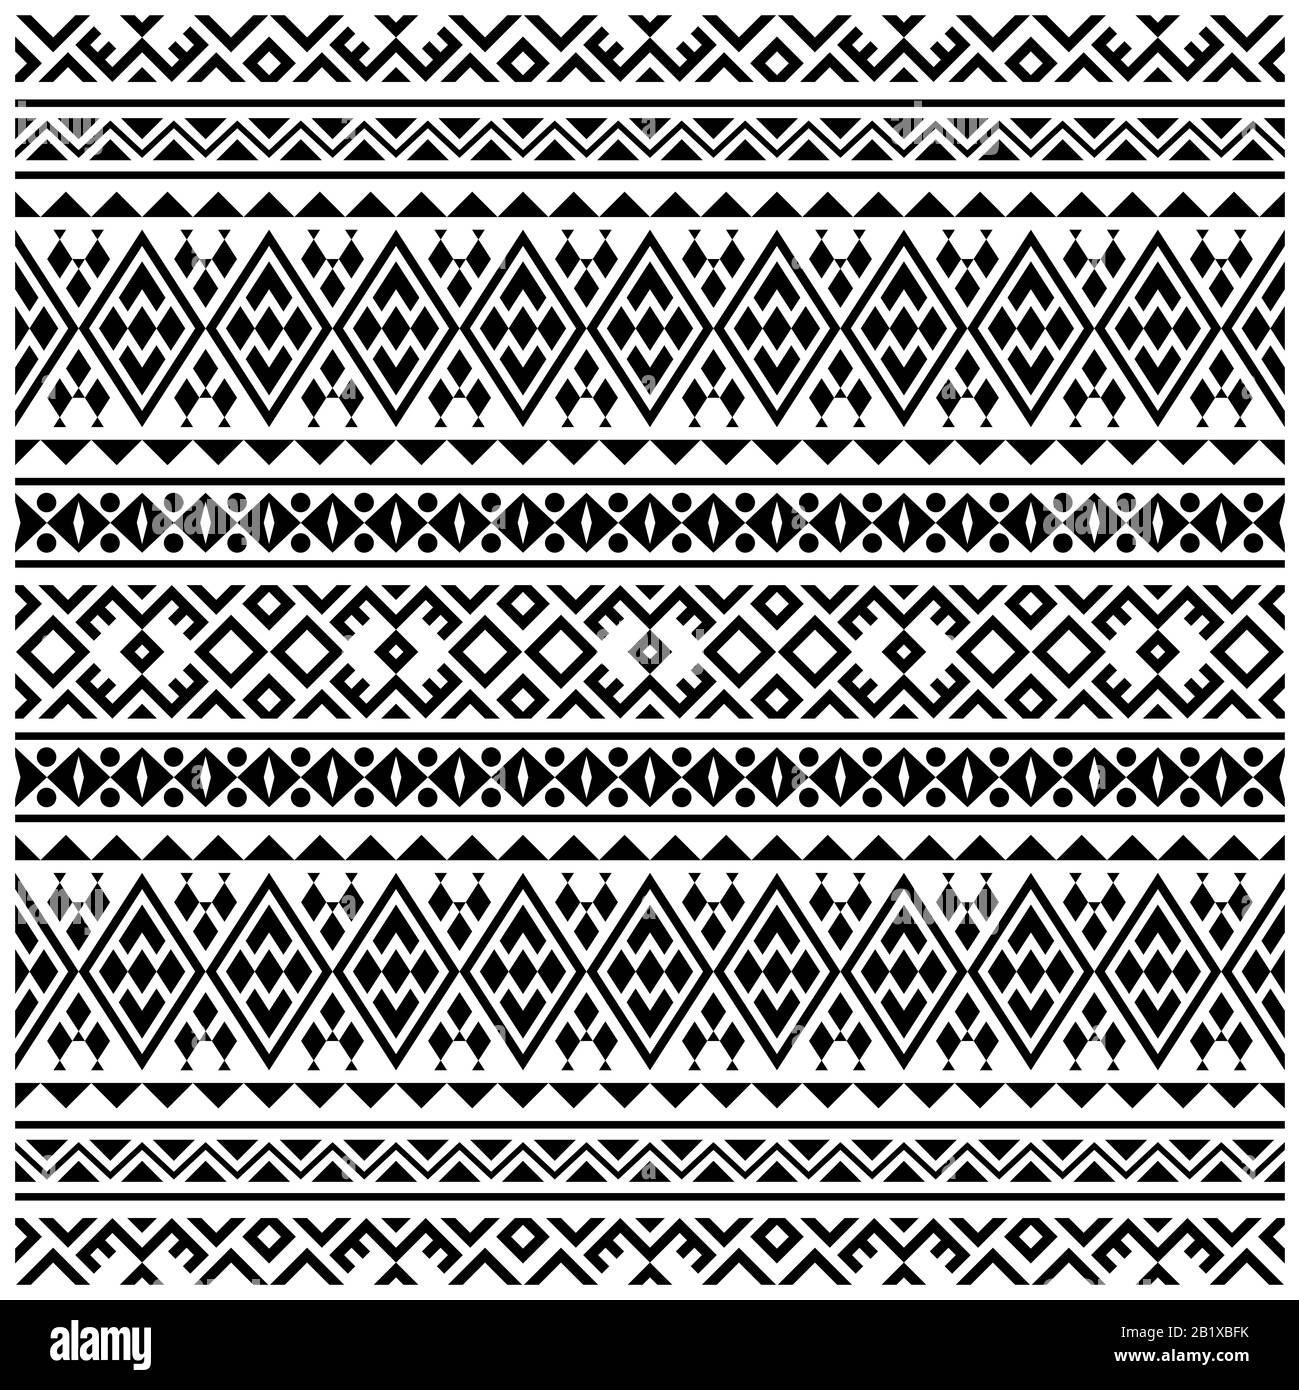 Tribal ethnic vector texture. Seamless striped pattern in Aztec style ...